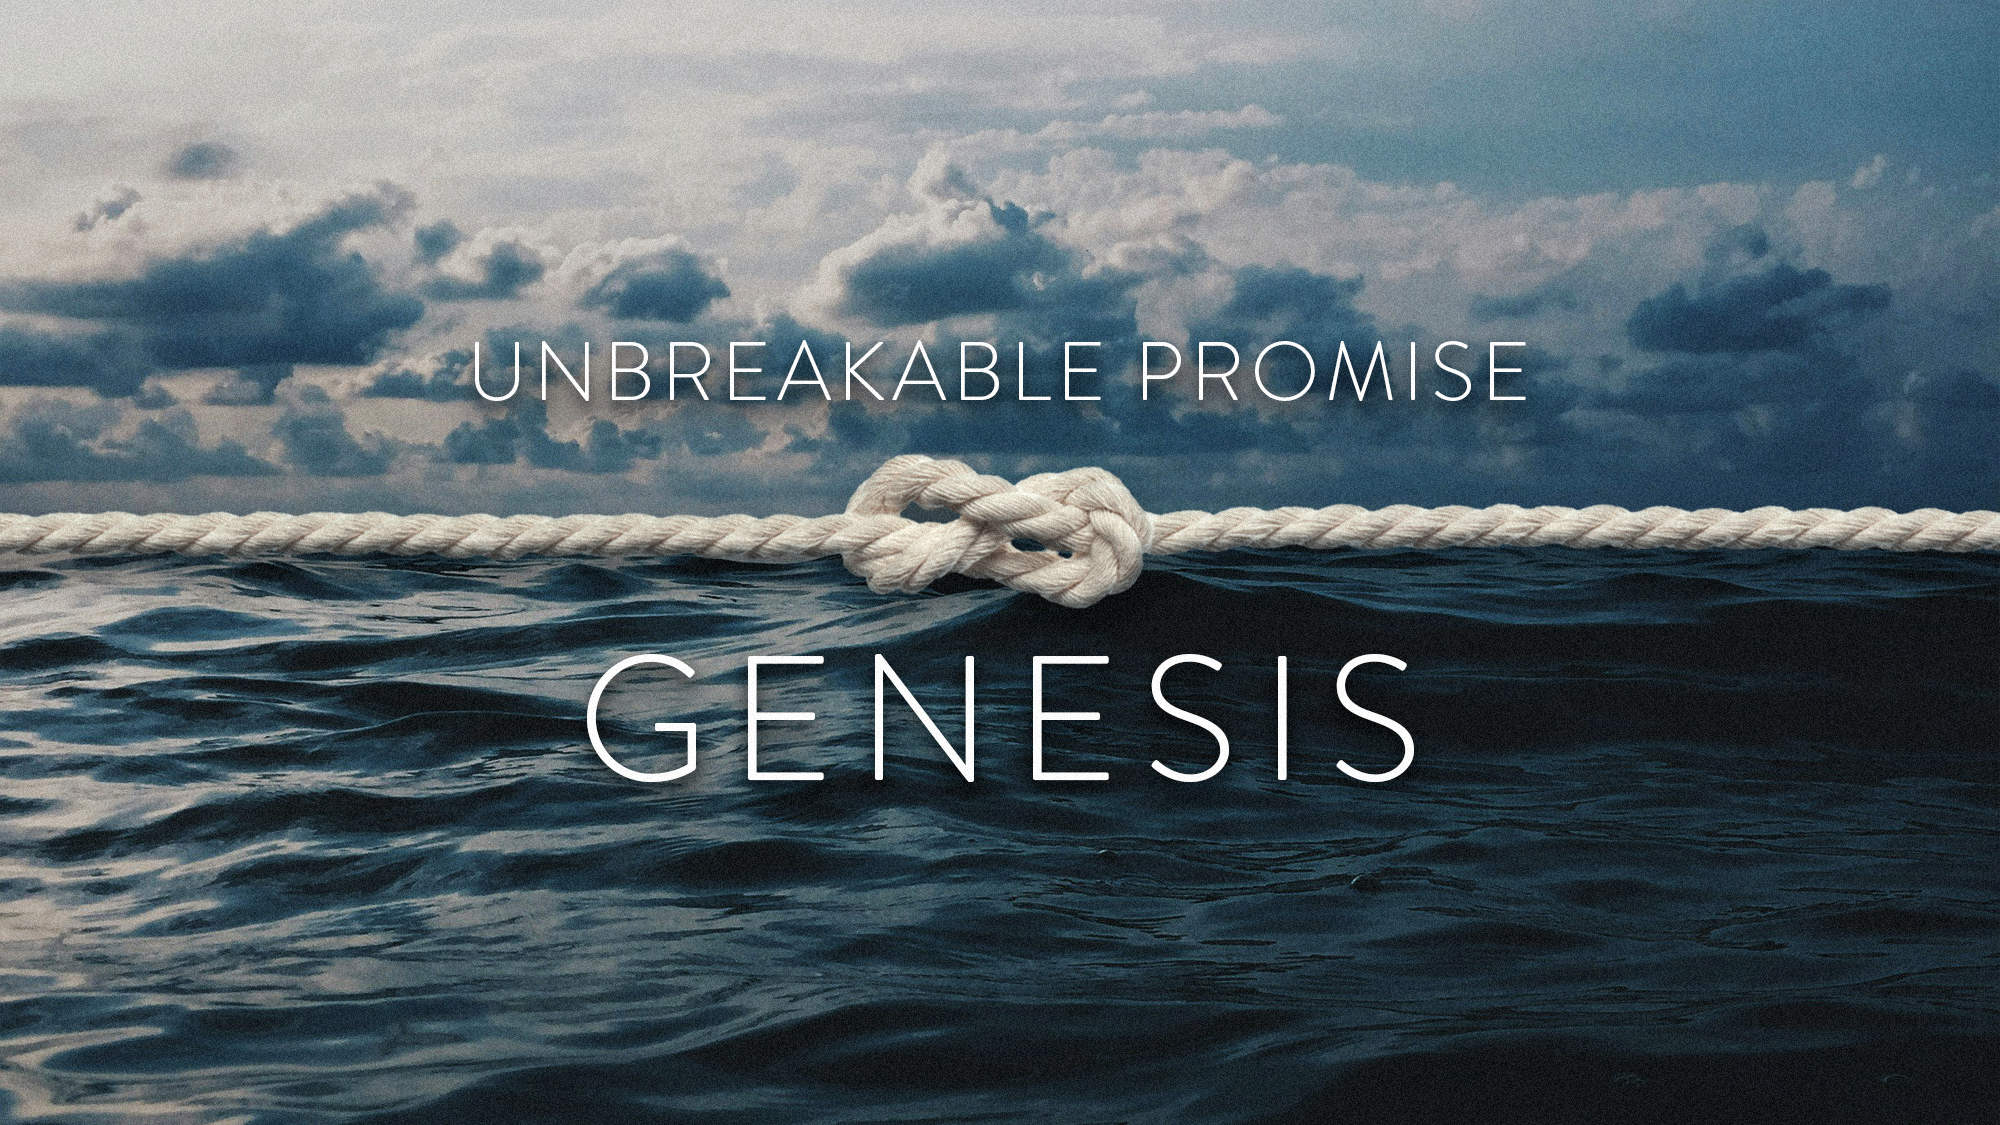 Unbreakable promise: Ridiculed